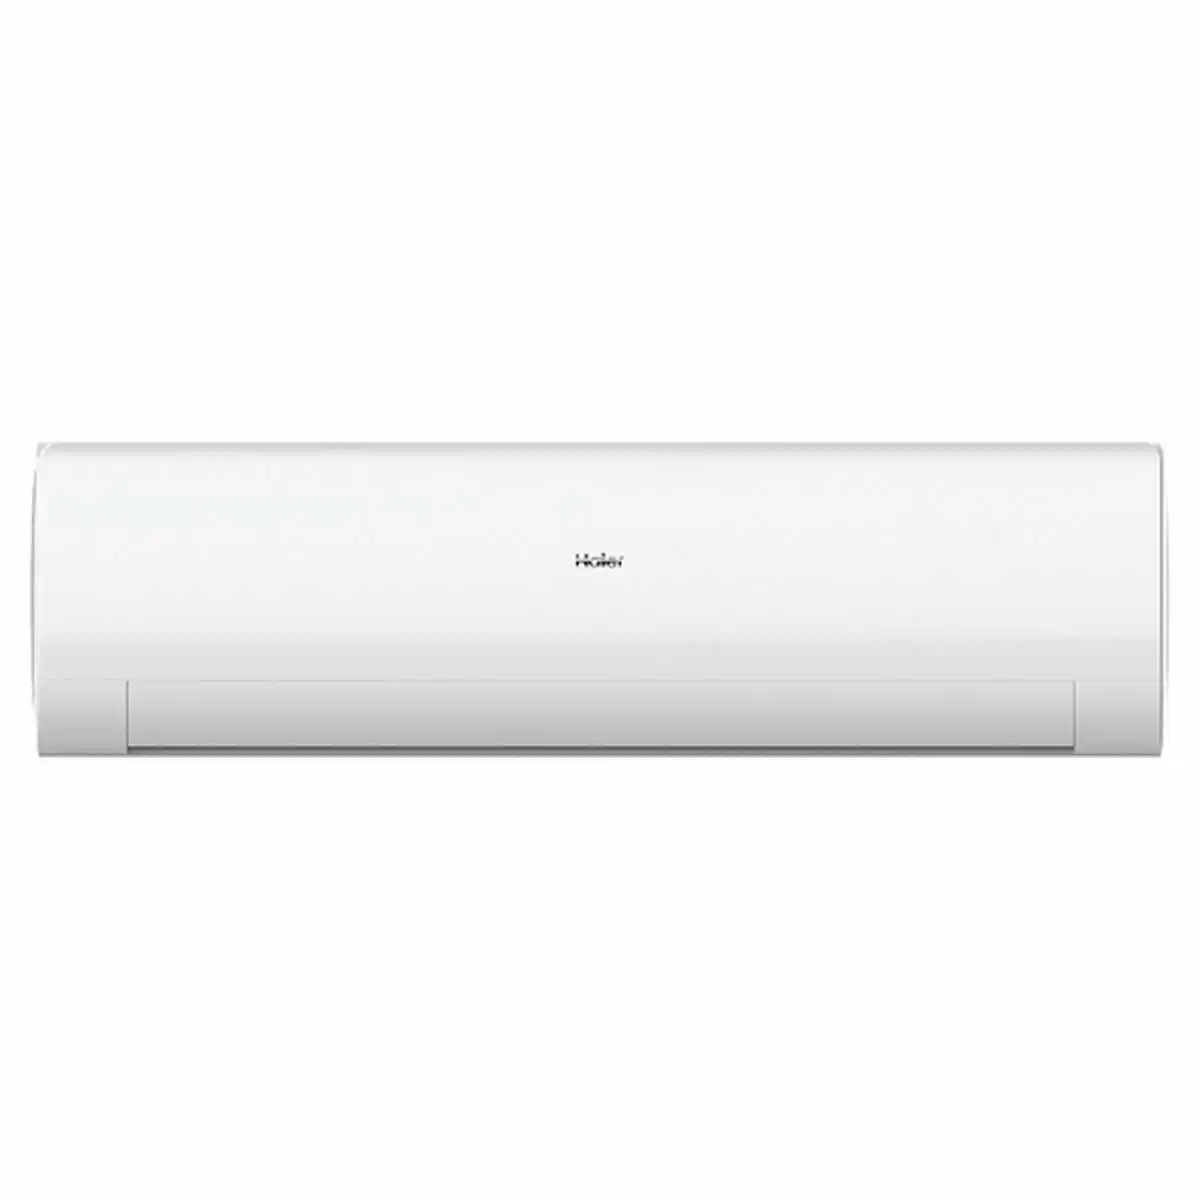 Haier 8.2kW Flexis Reverse Cycle Split System Inverter Air Conditioner DRED Enabled